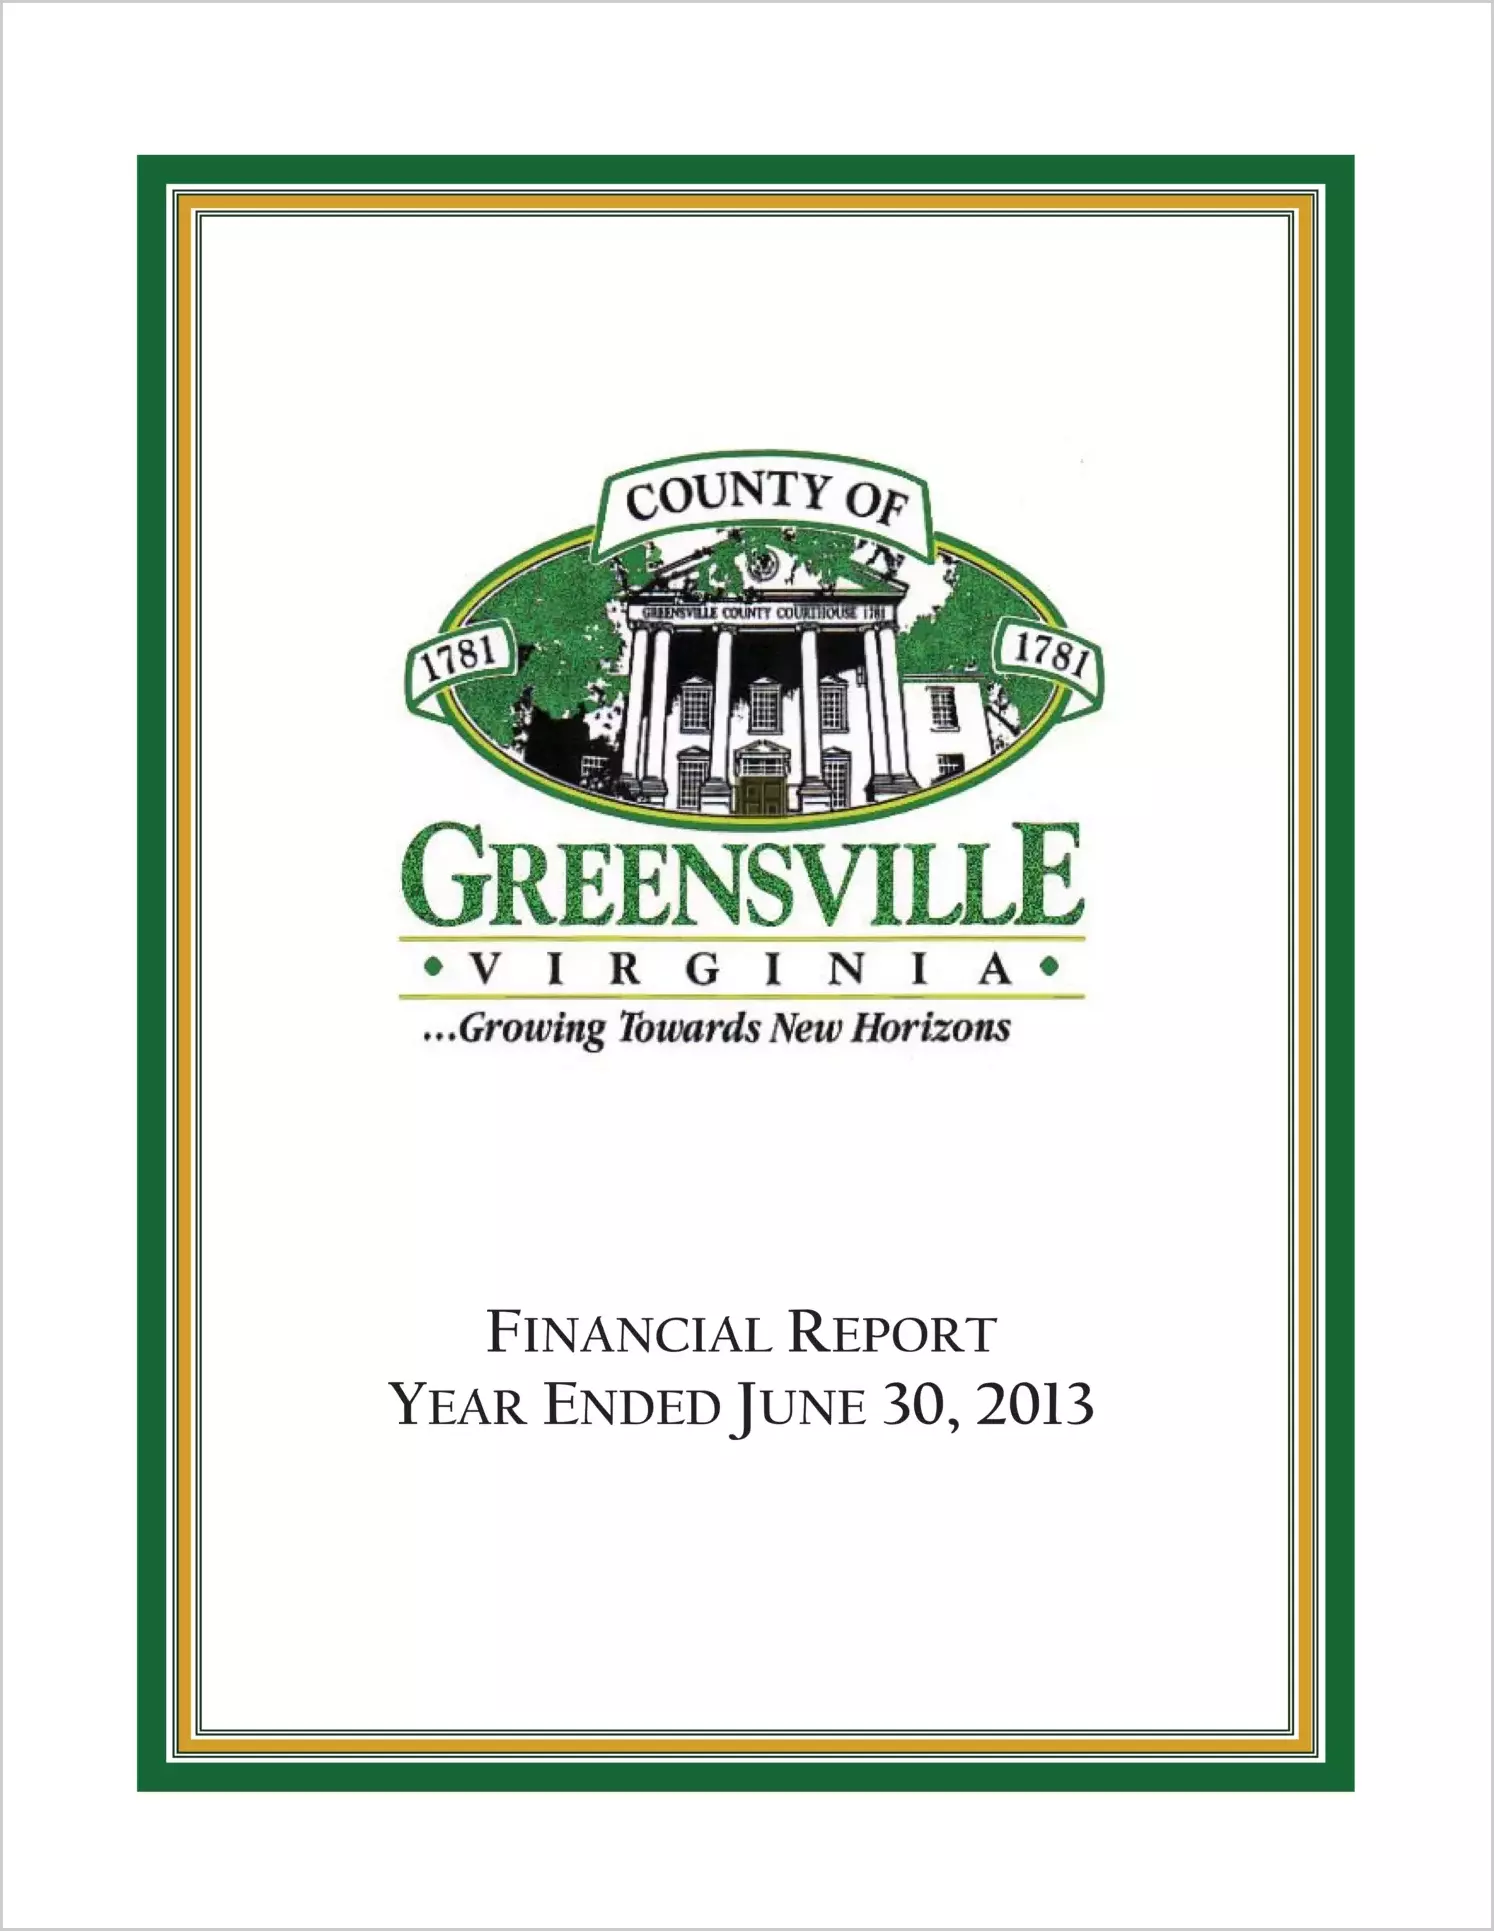 2013 Annual Financial Report for County of Greensville